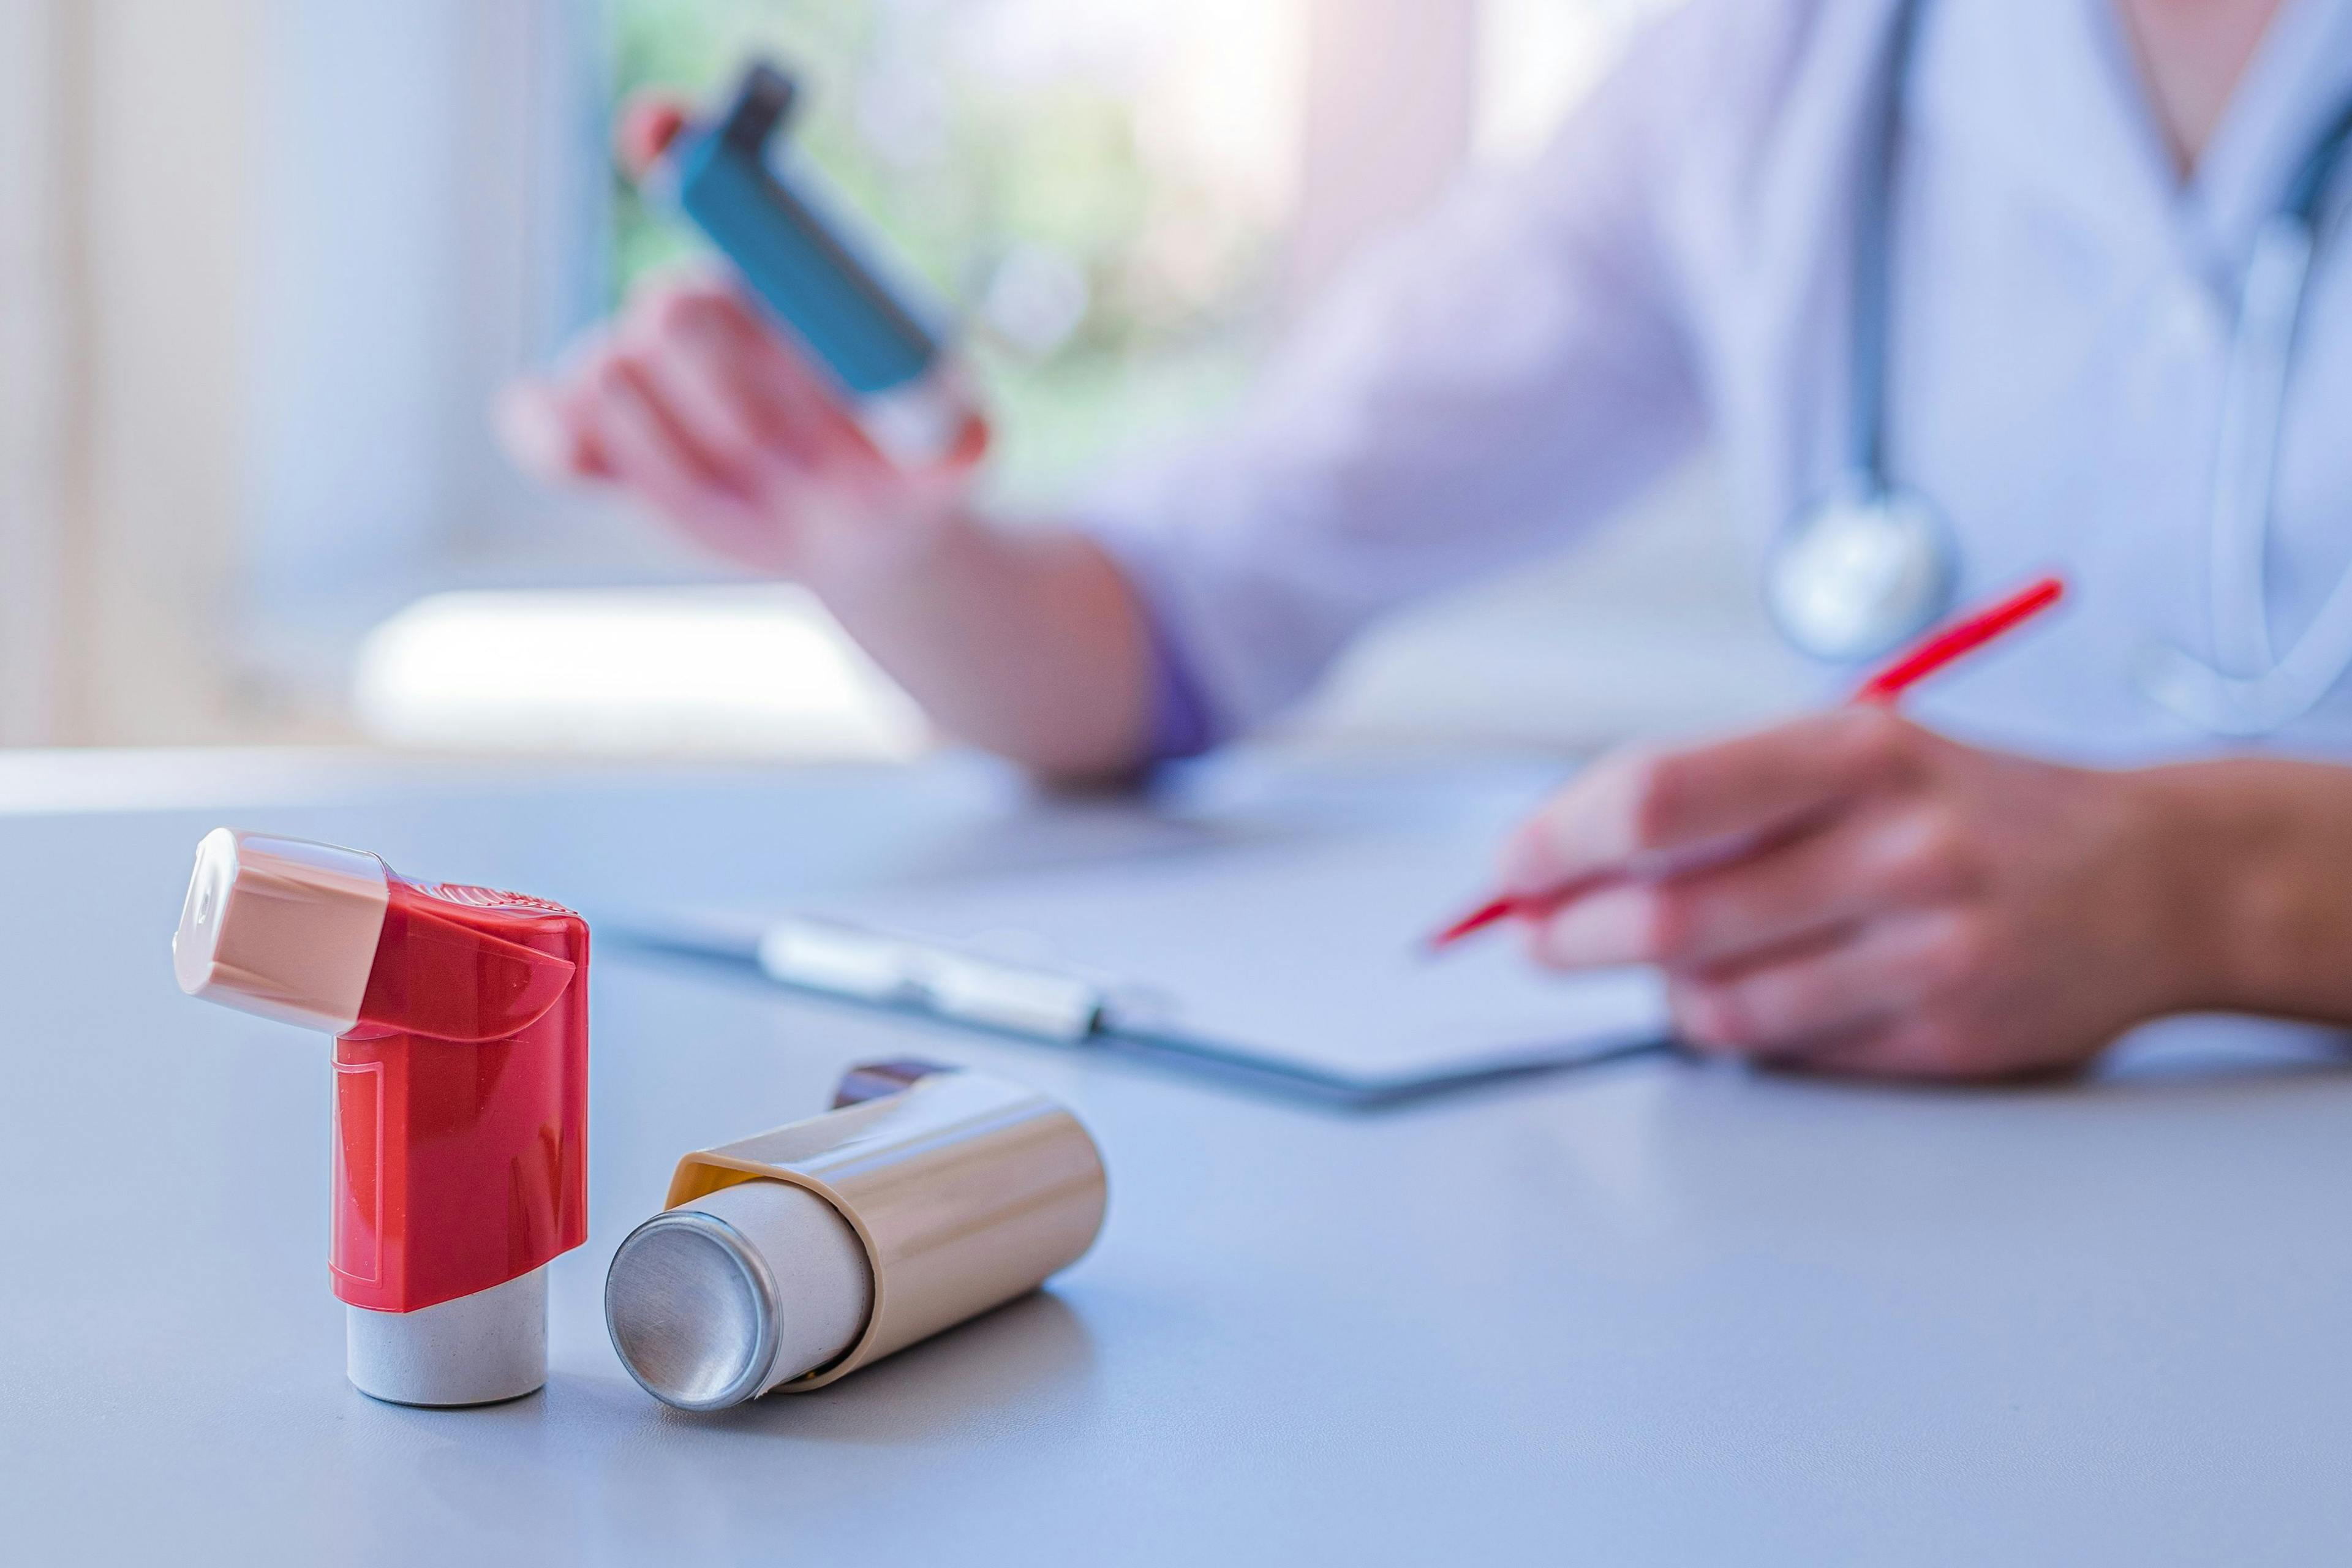 Doctor writes medical prescription for asthma inhaler to asthmatic patient during medical consultation and examination in hospital | Image Credit: Goffkein - stock.adobe.com